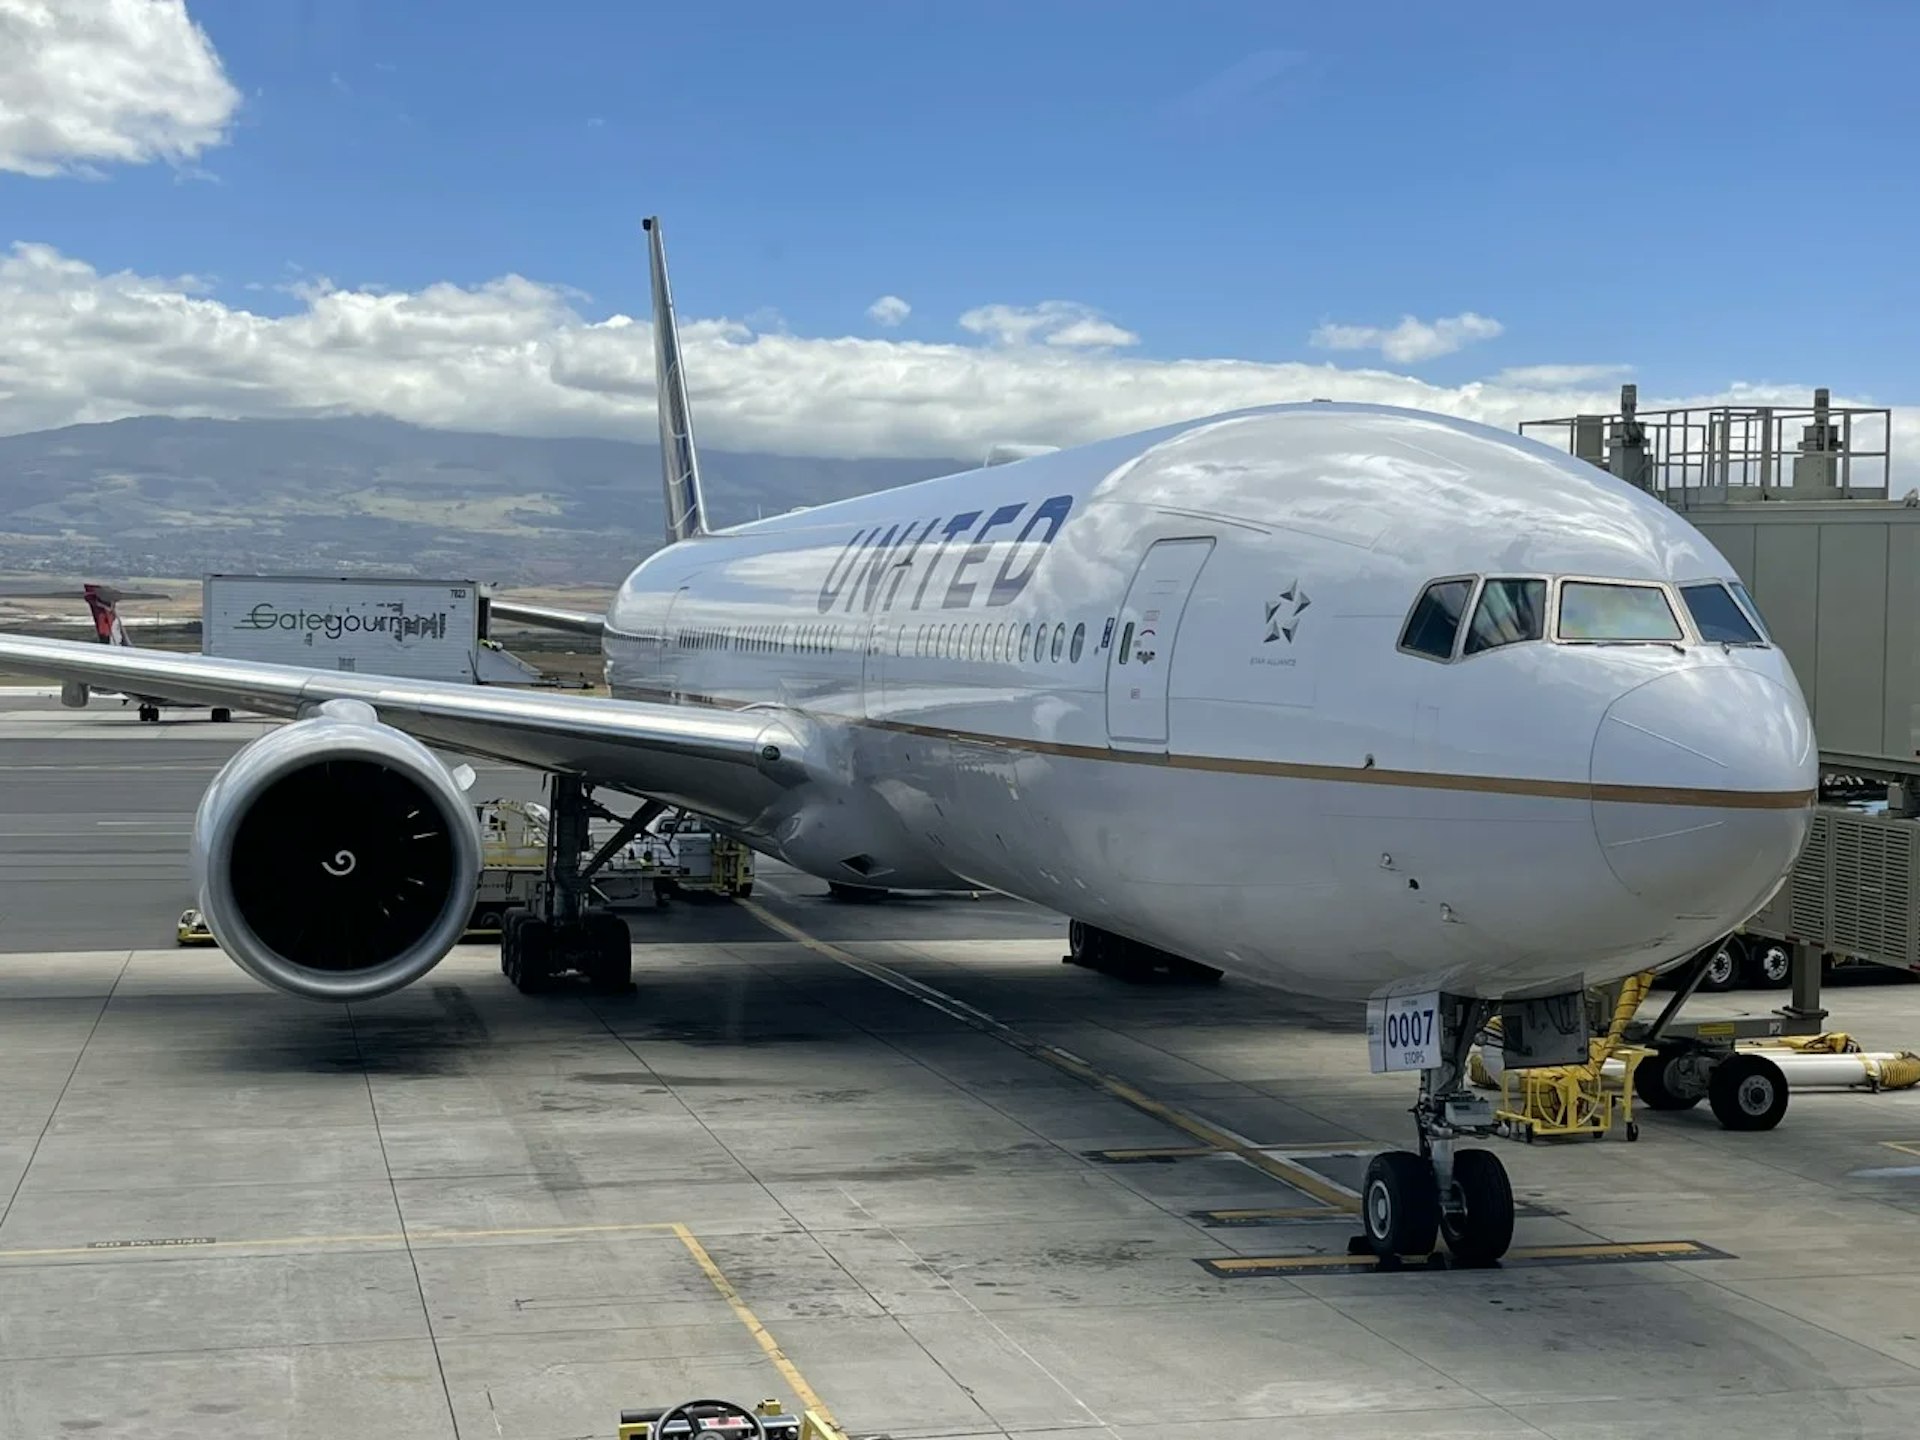 Travel on United to Hawaii for as little as 23,000 miles round-trip